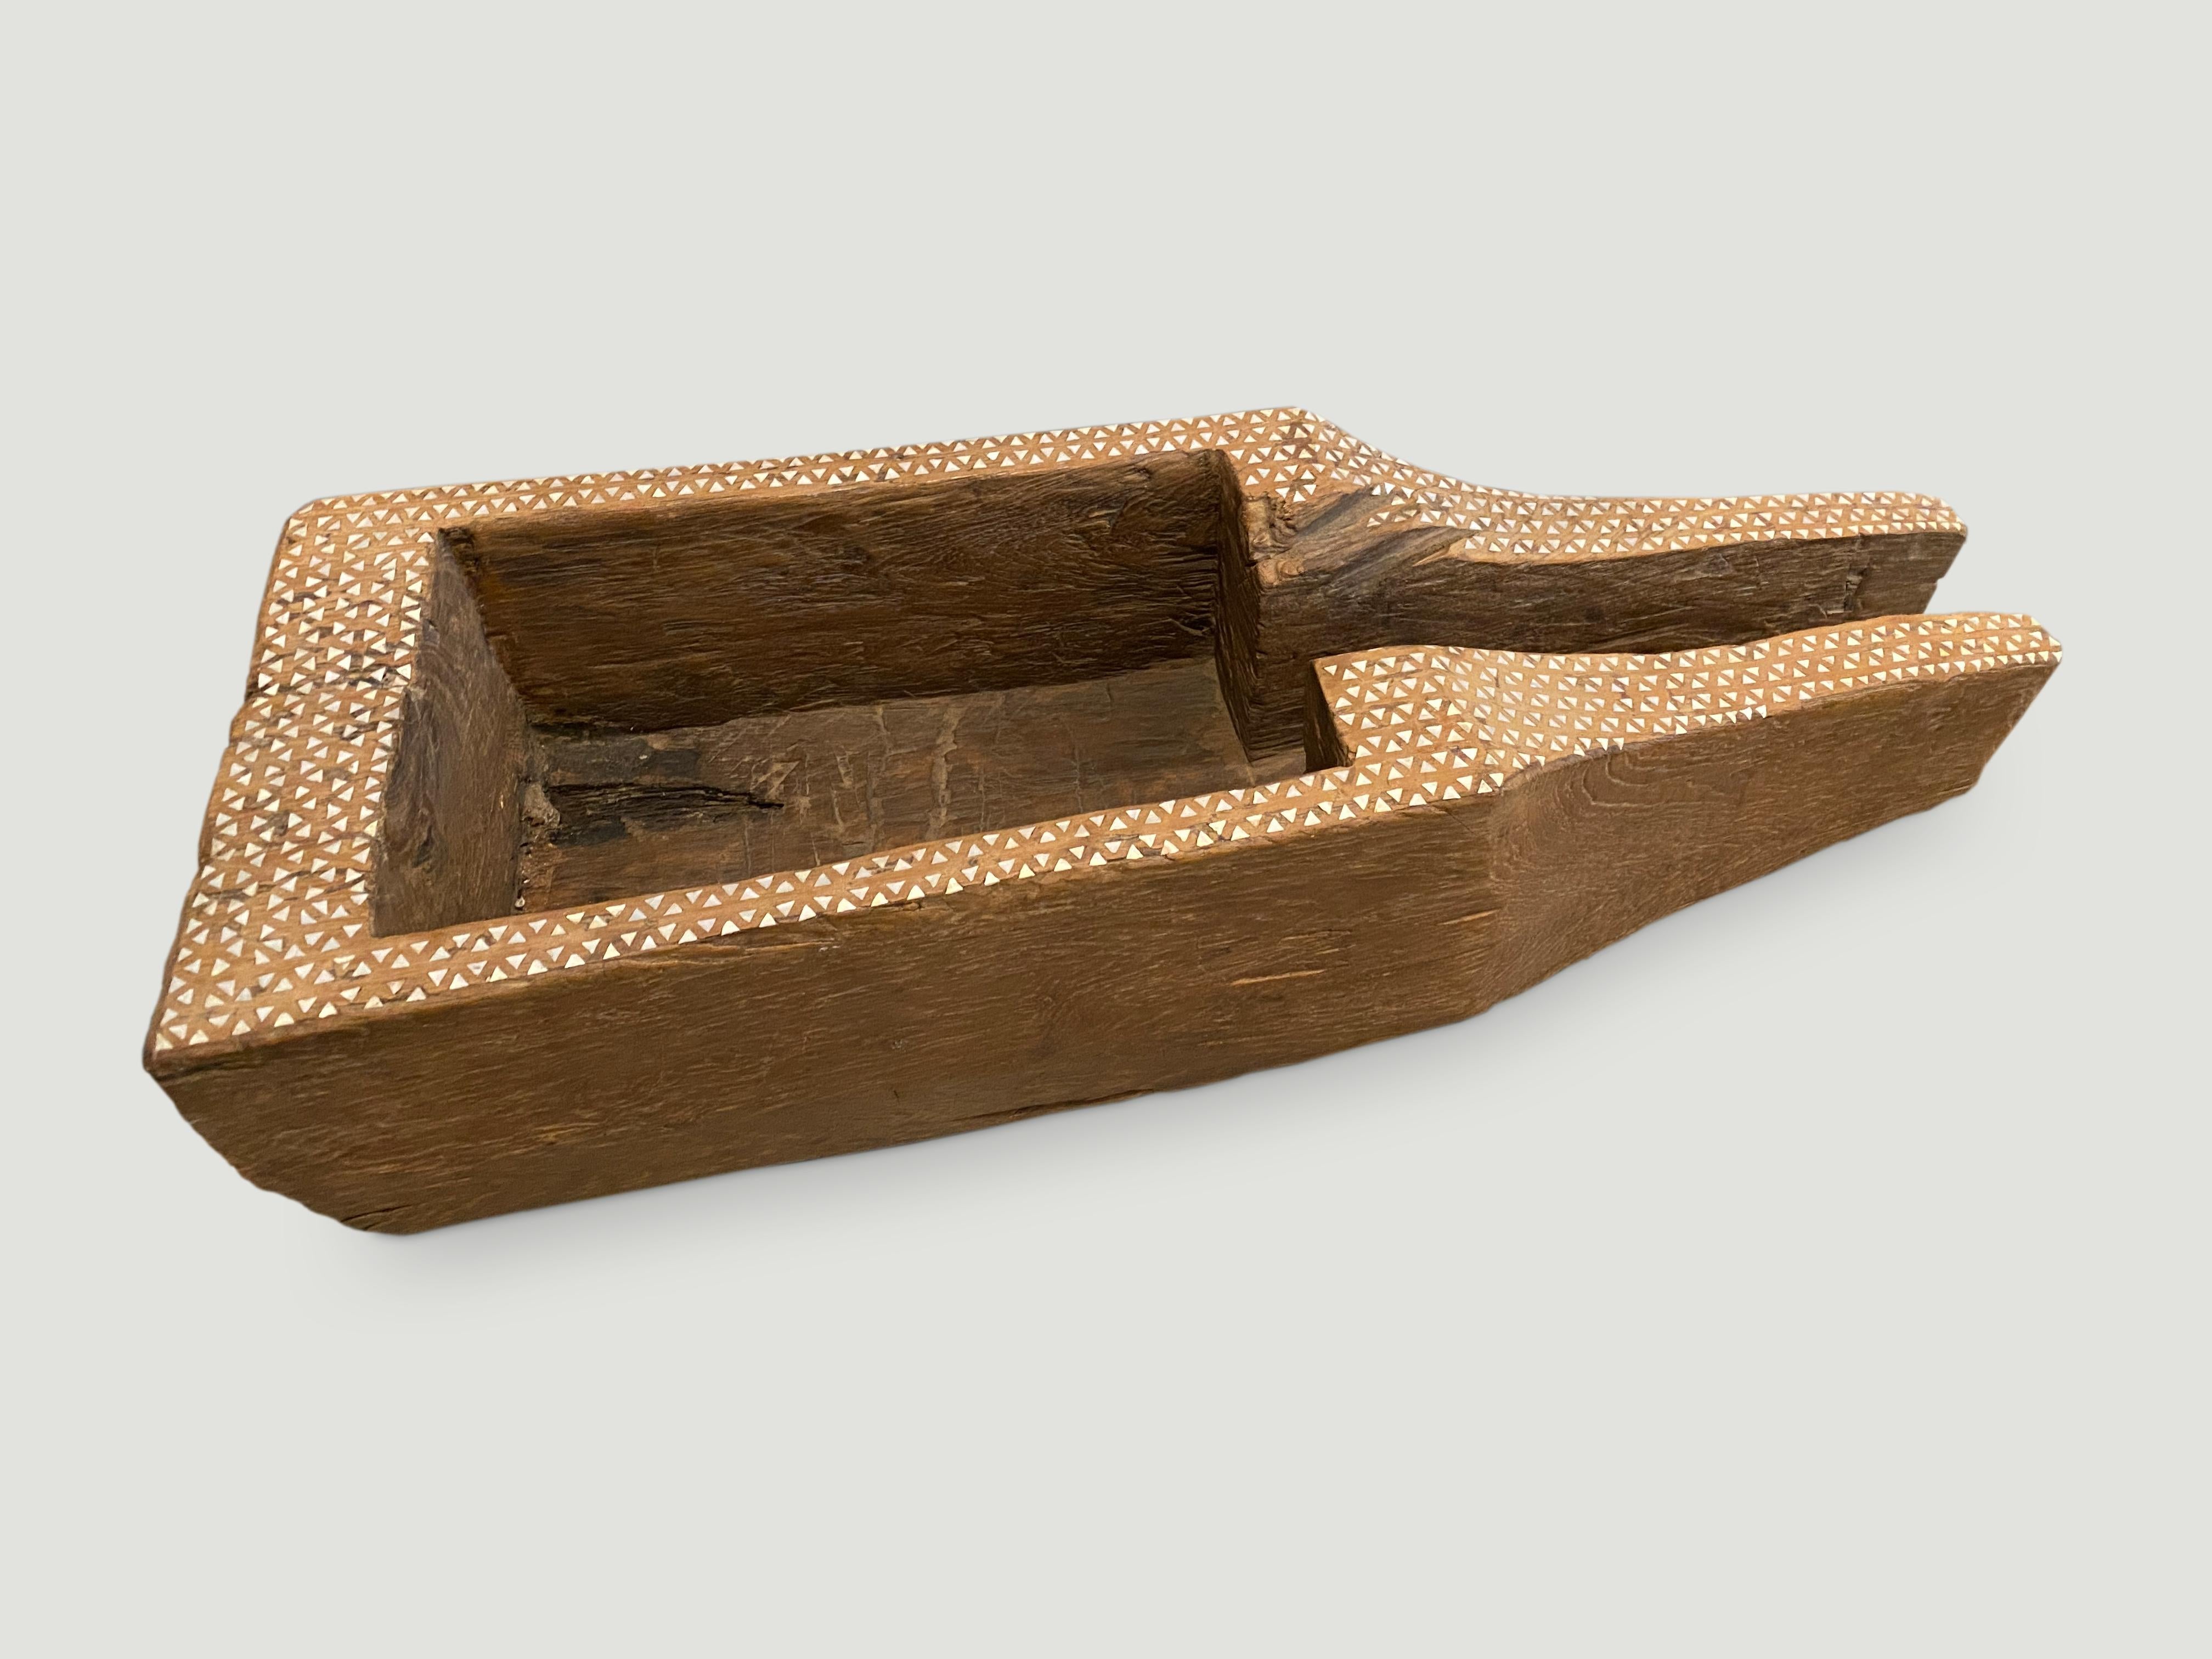 Beautiful aged teak wood container originally used to store rice. We have added the shell inlay by hand to the top section. A multiple of uses such as storing towels, magazines, firewood etc etc

This antique container was sourced in the spirit of